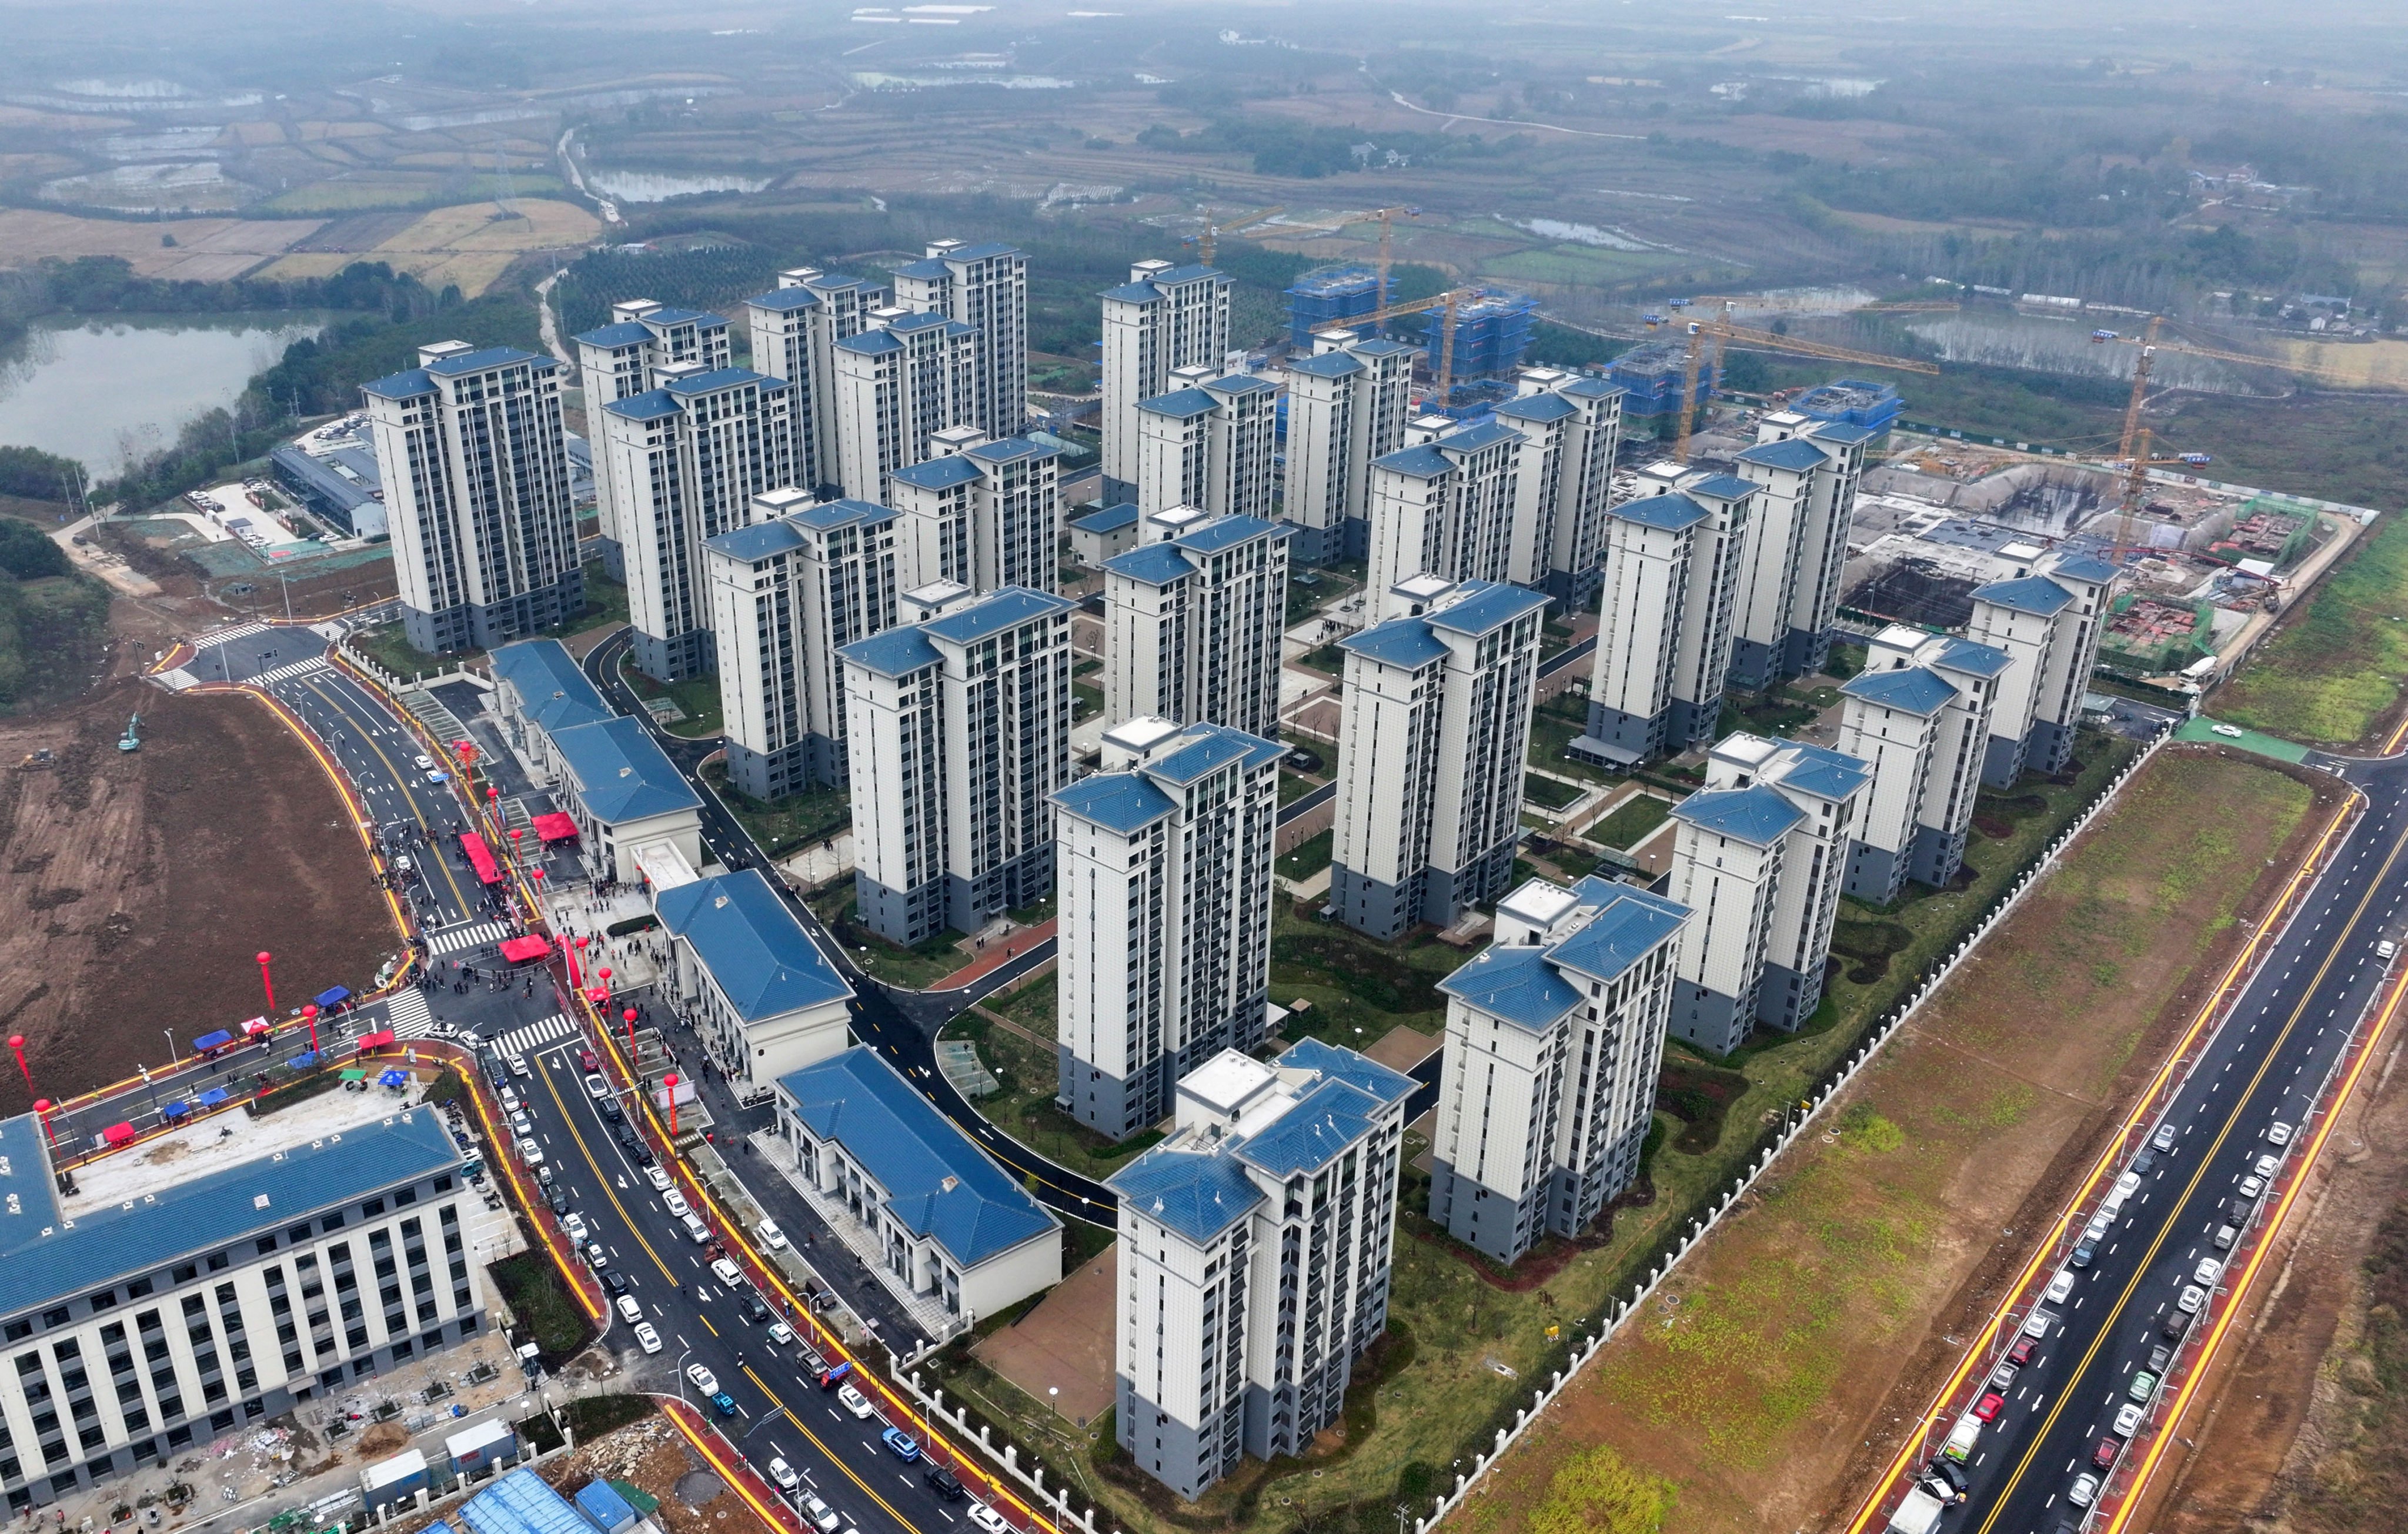 Industry watchers’ cautious view on Beijing’s stimulus plan reflects how solving China’s deteriorated housing market remains a daunting task. Photo: Xinhua